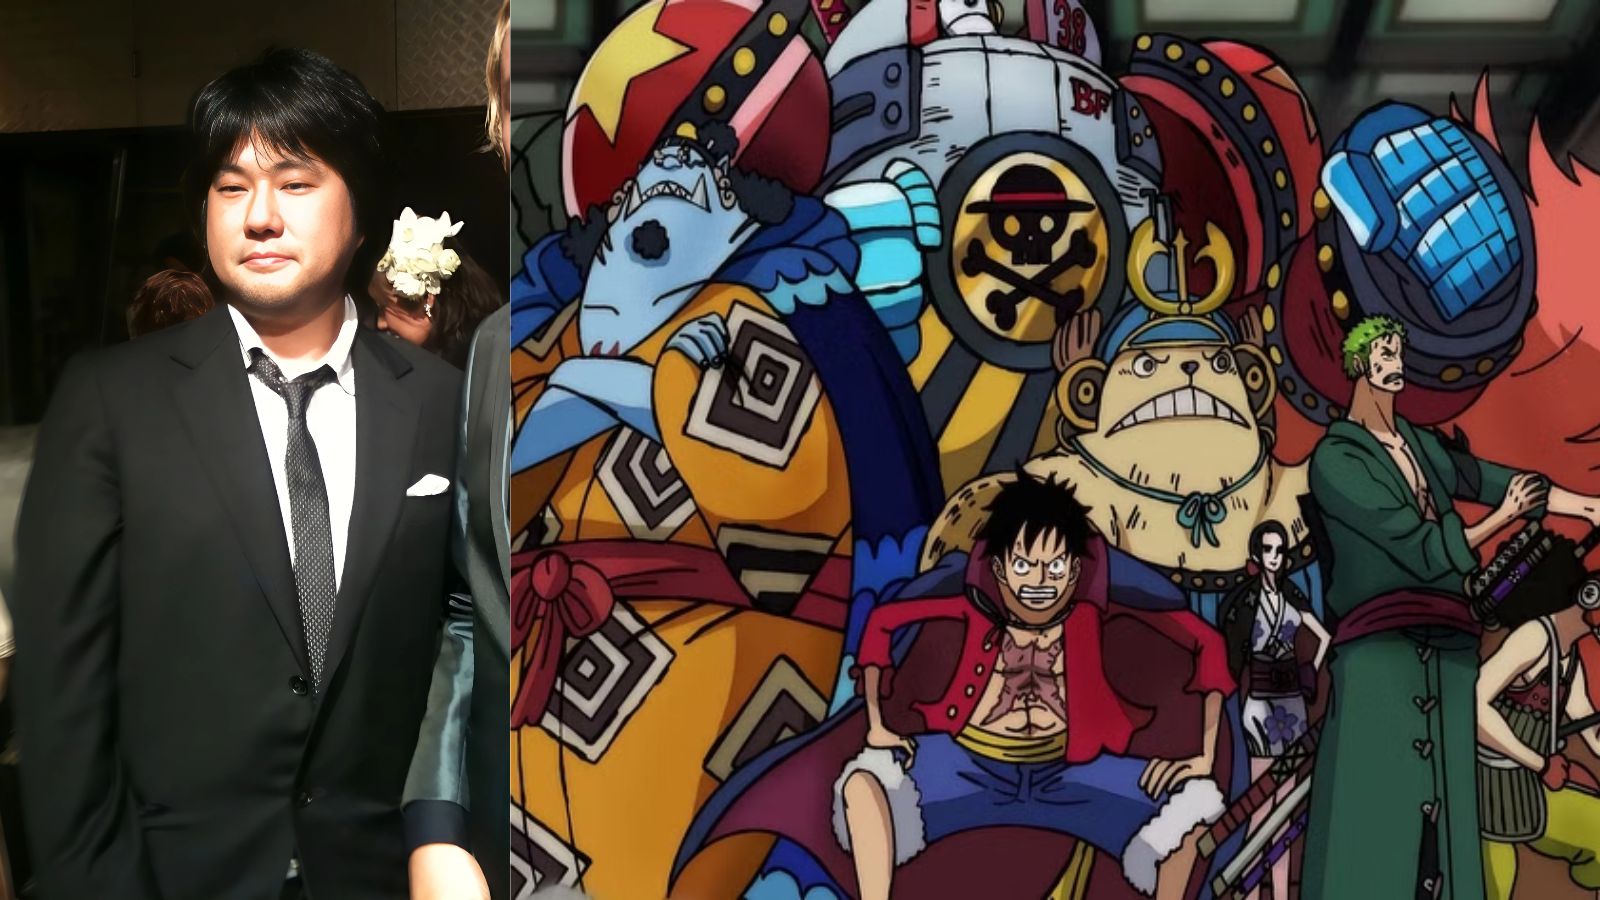 In the One Piece universe, what is stopping anyone from flying